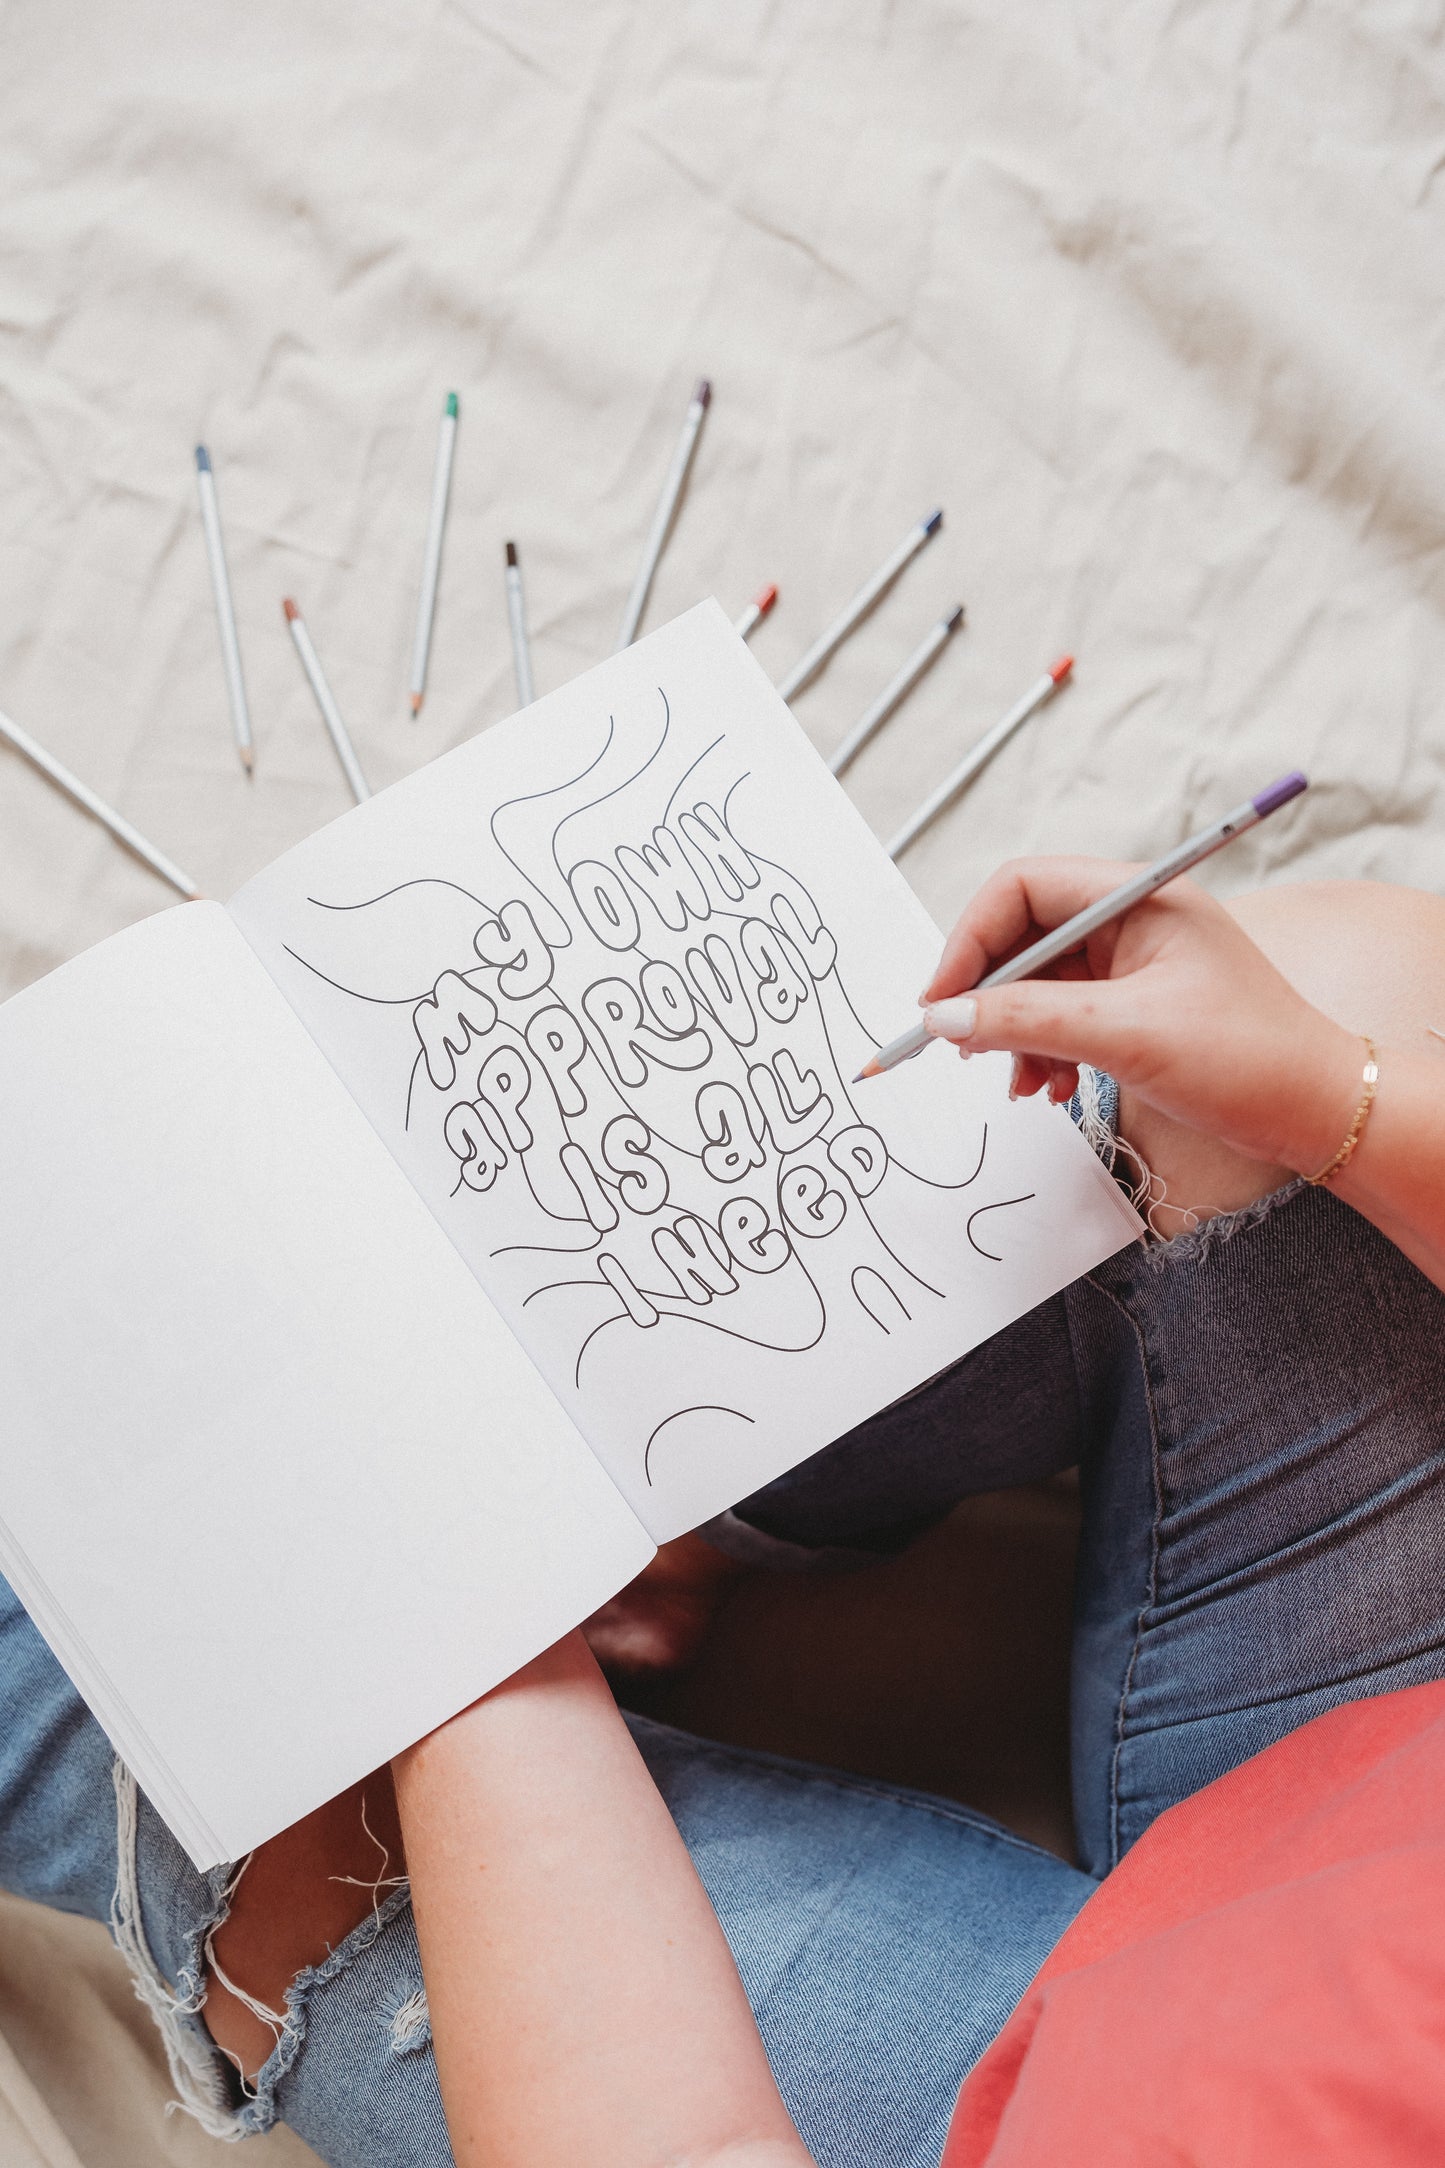 Feeling' Groovy Affirmations Coloring Book